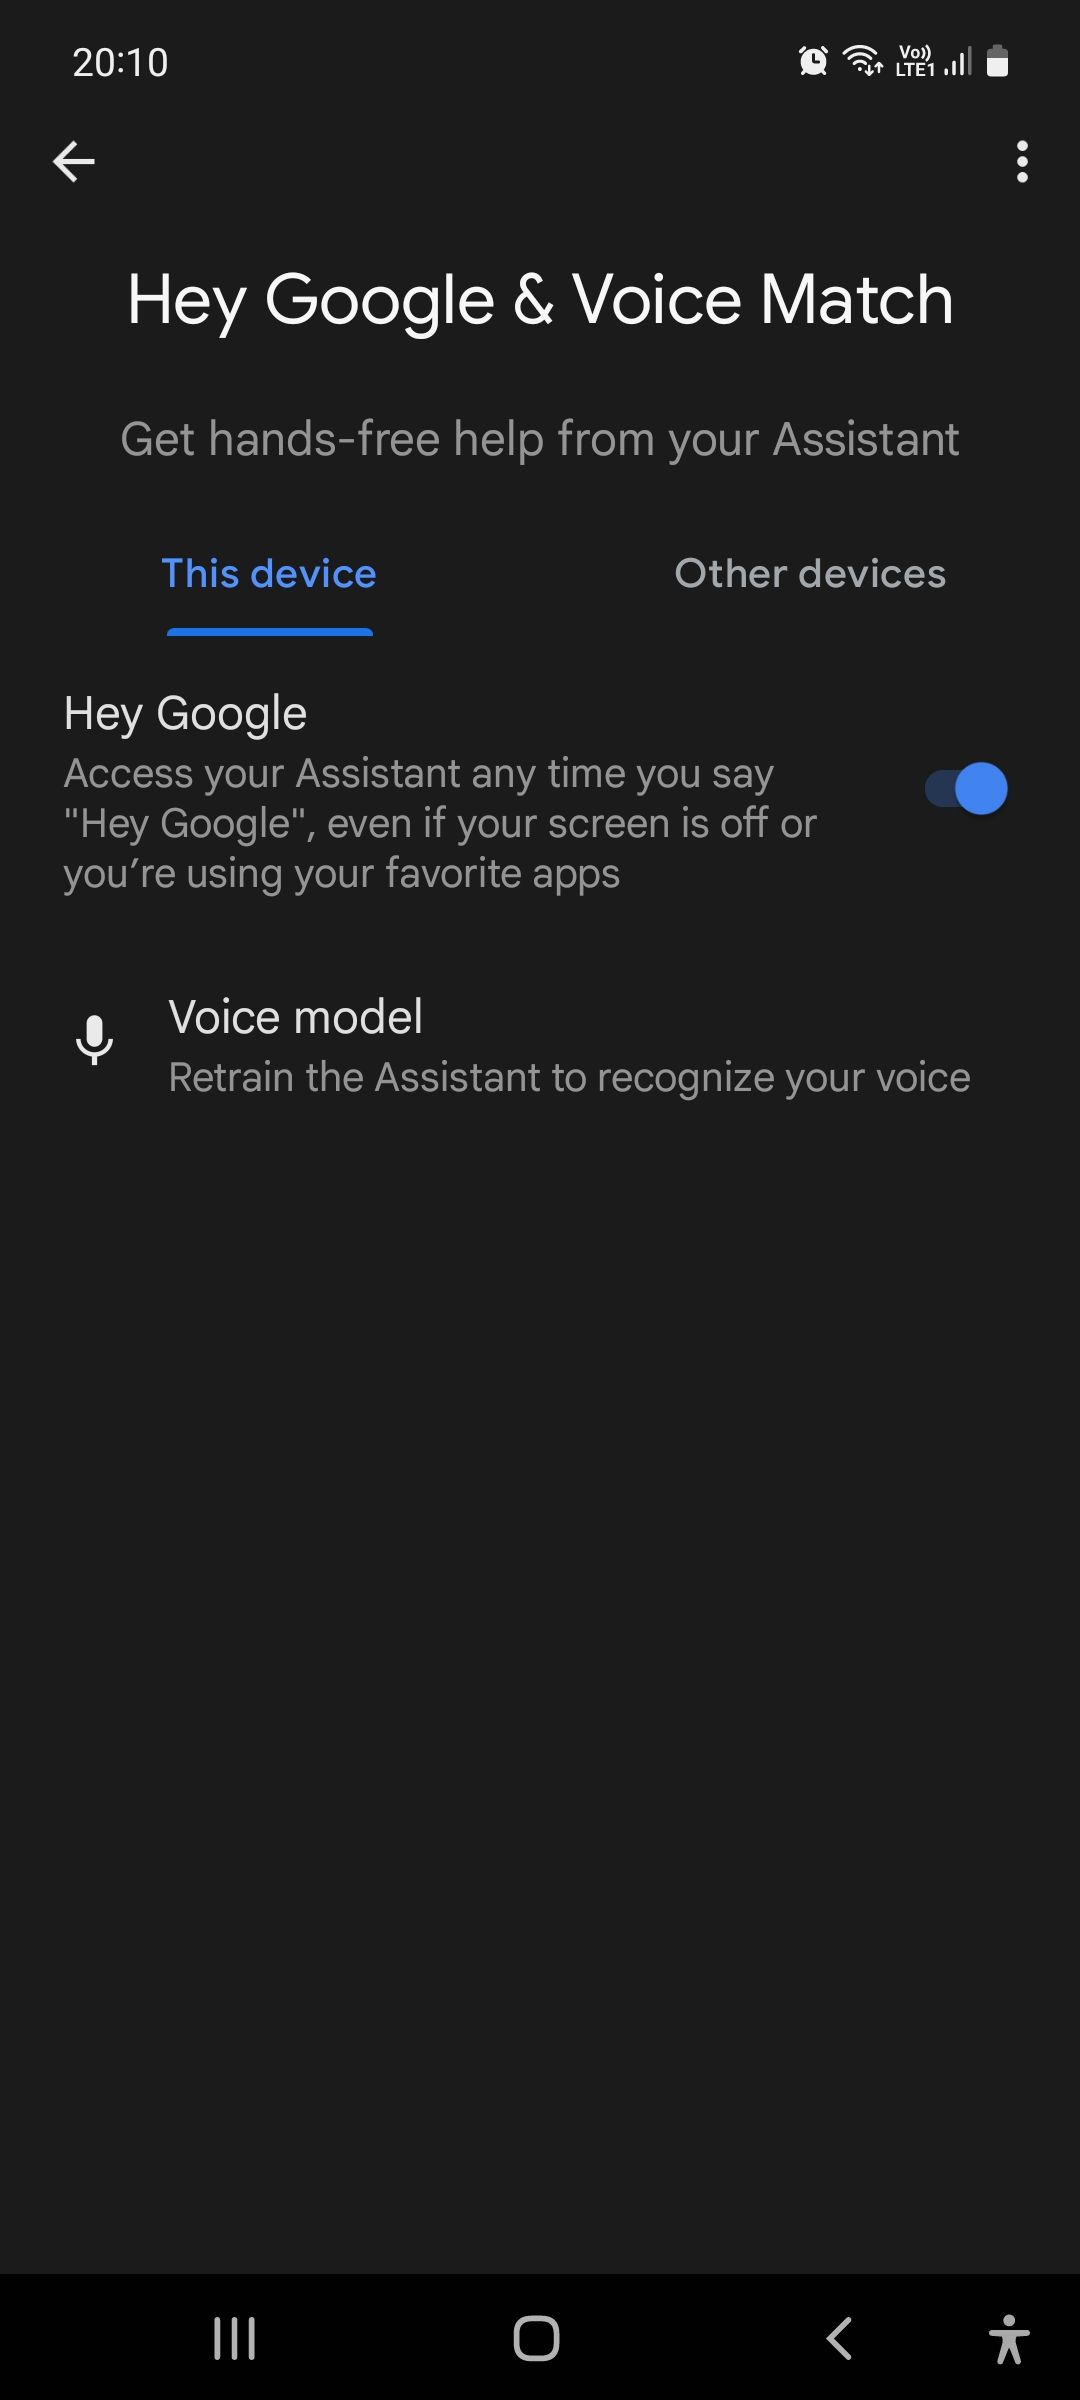 Hey Siri, ok Google - Activate Google Now on iOS with your voice! 